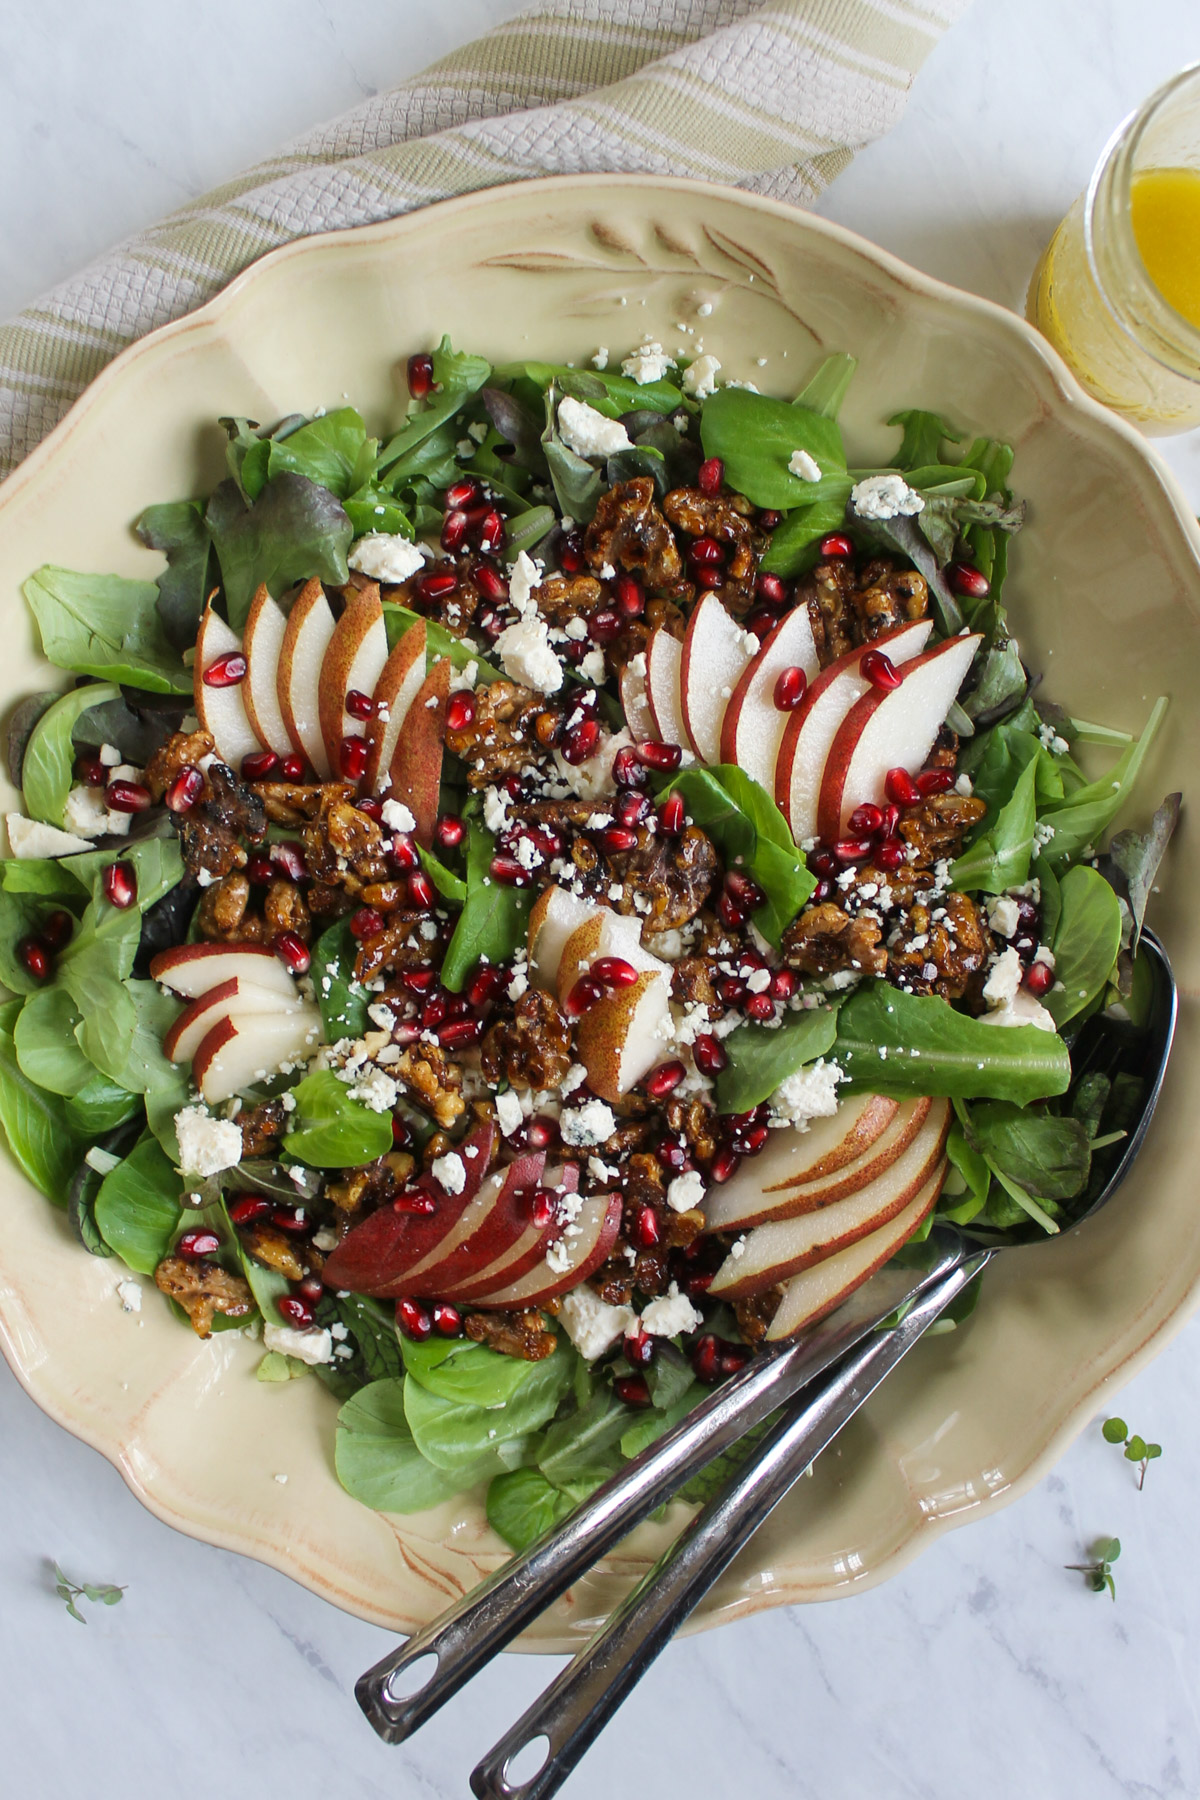 A serving dish of Pear and Blue Cheese Salad with Glazed Honey Walnuts and serving spoons.